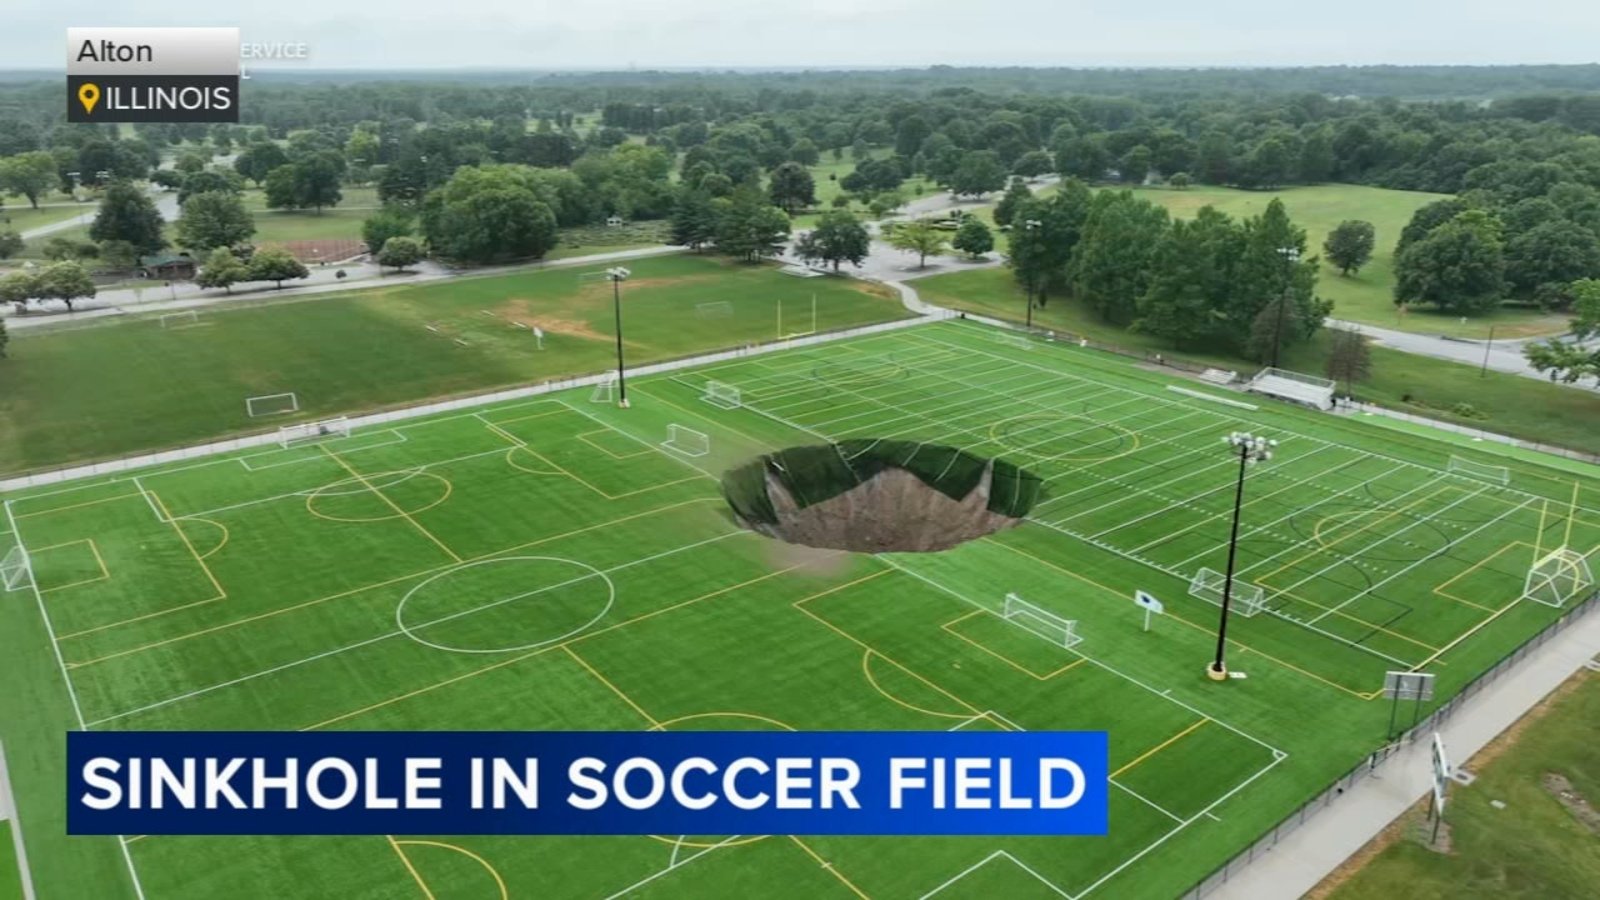 Sinkhole caused by mine collapse downstate swallows up soccer field: VIDEO - WLS-TV